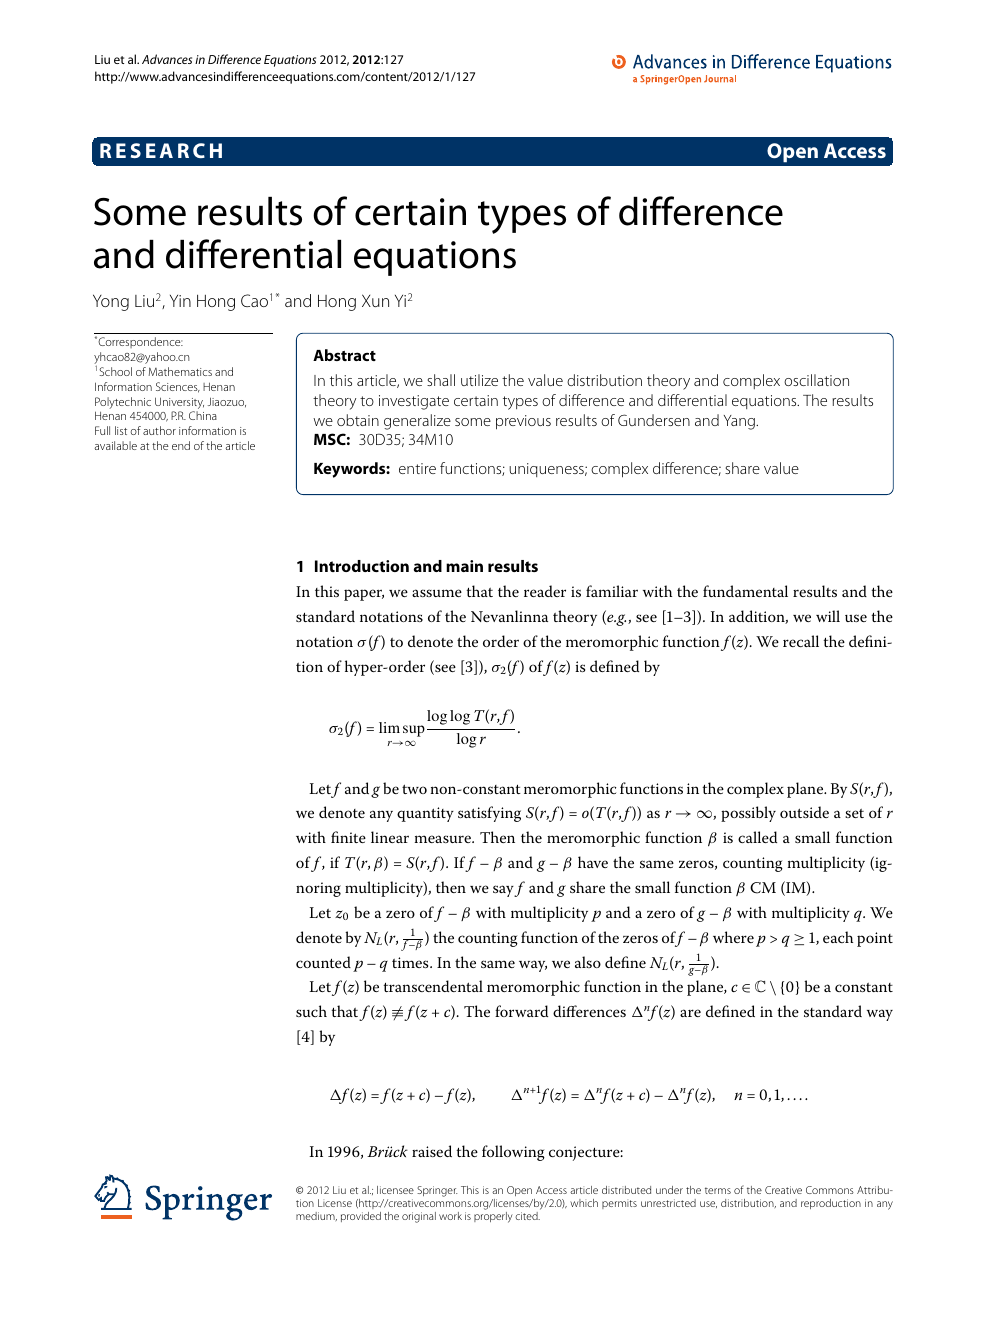 Some Results Of Certain Types Of Difference And Differential Equations Topic Of Research Paper In Mathematics Download Scholarly Article Pdf And Read For Free On Cyberleninka Open Science Hub